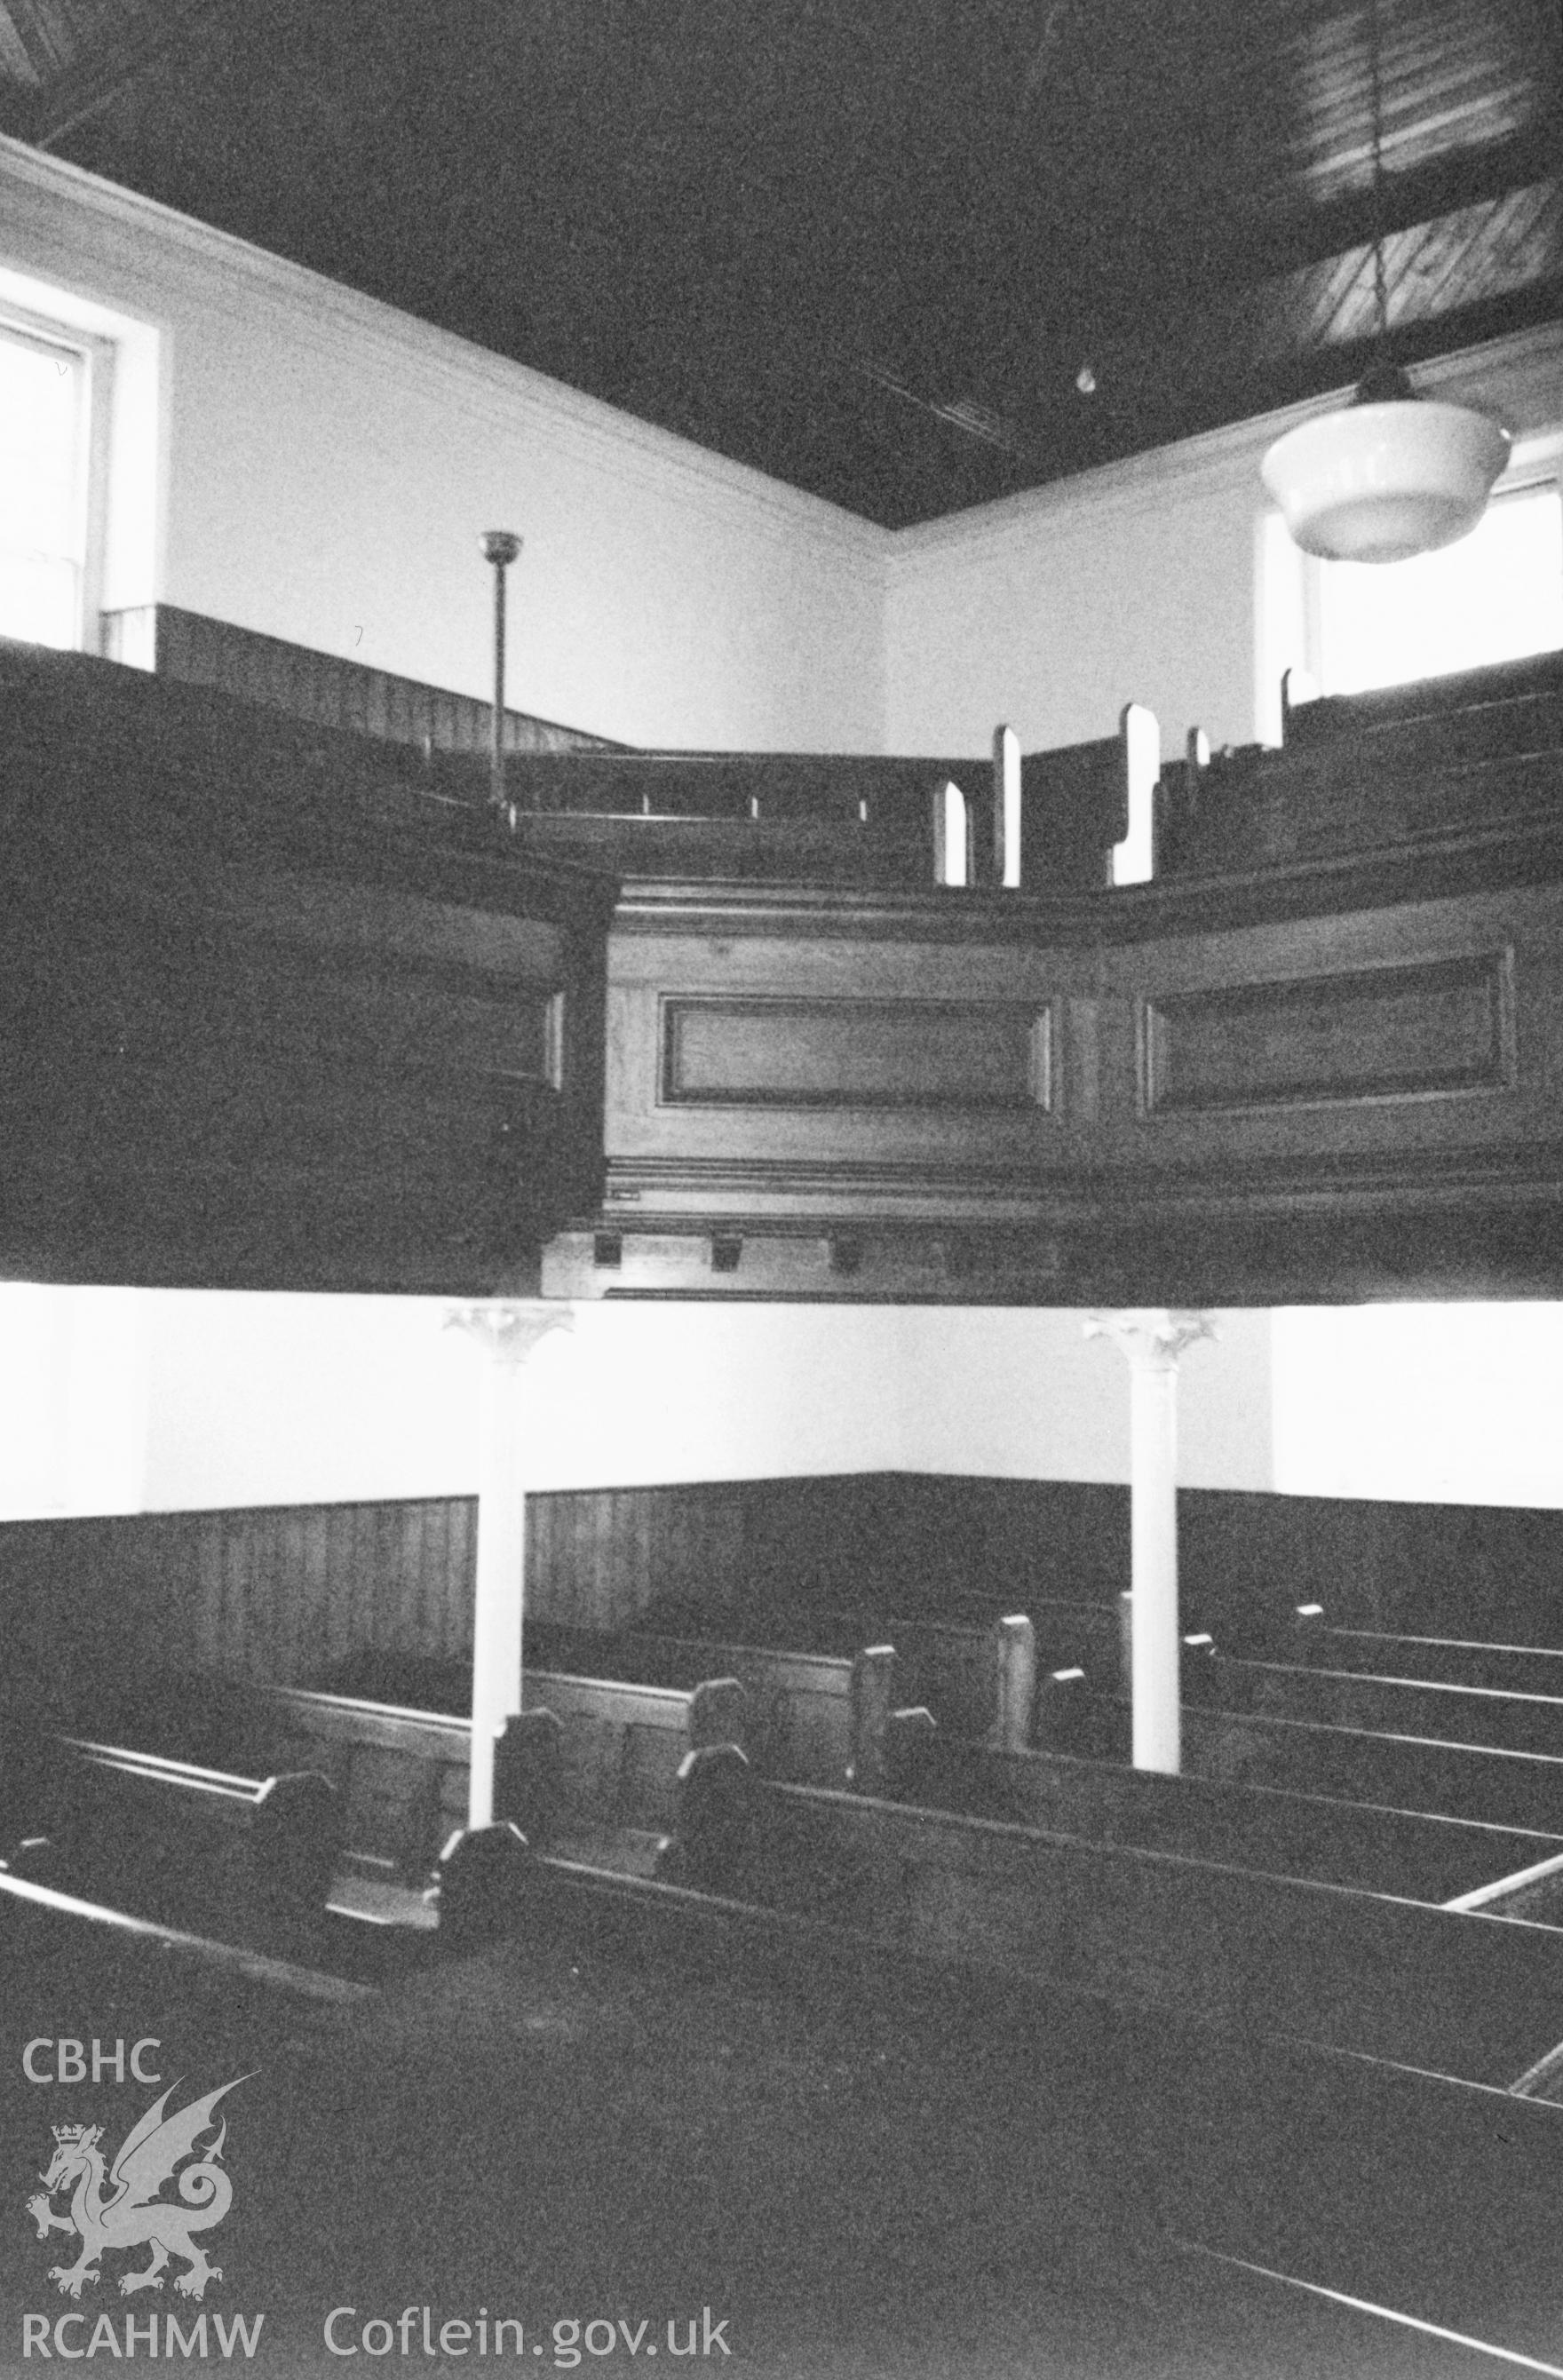 Digital copy of a black and white photograph showing an interior view of Libanus Baptist Chapel, Llansadwrn, taken by Robert Scourfield, 1996.